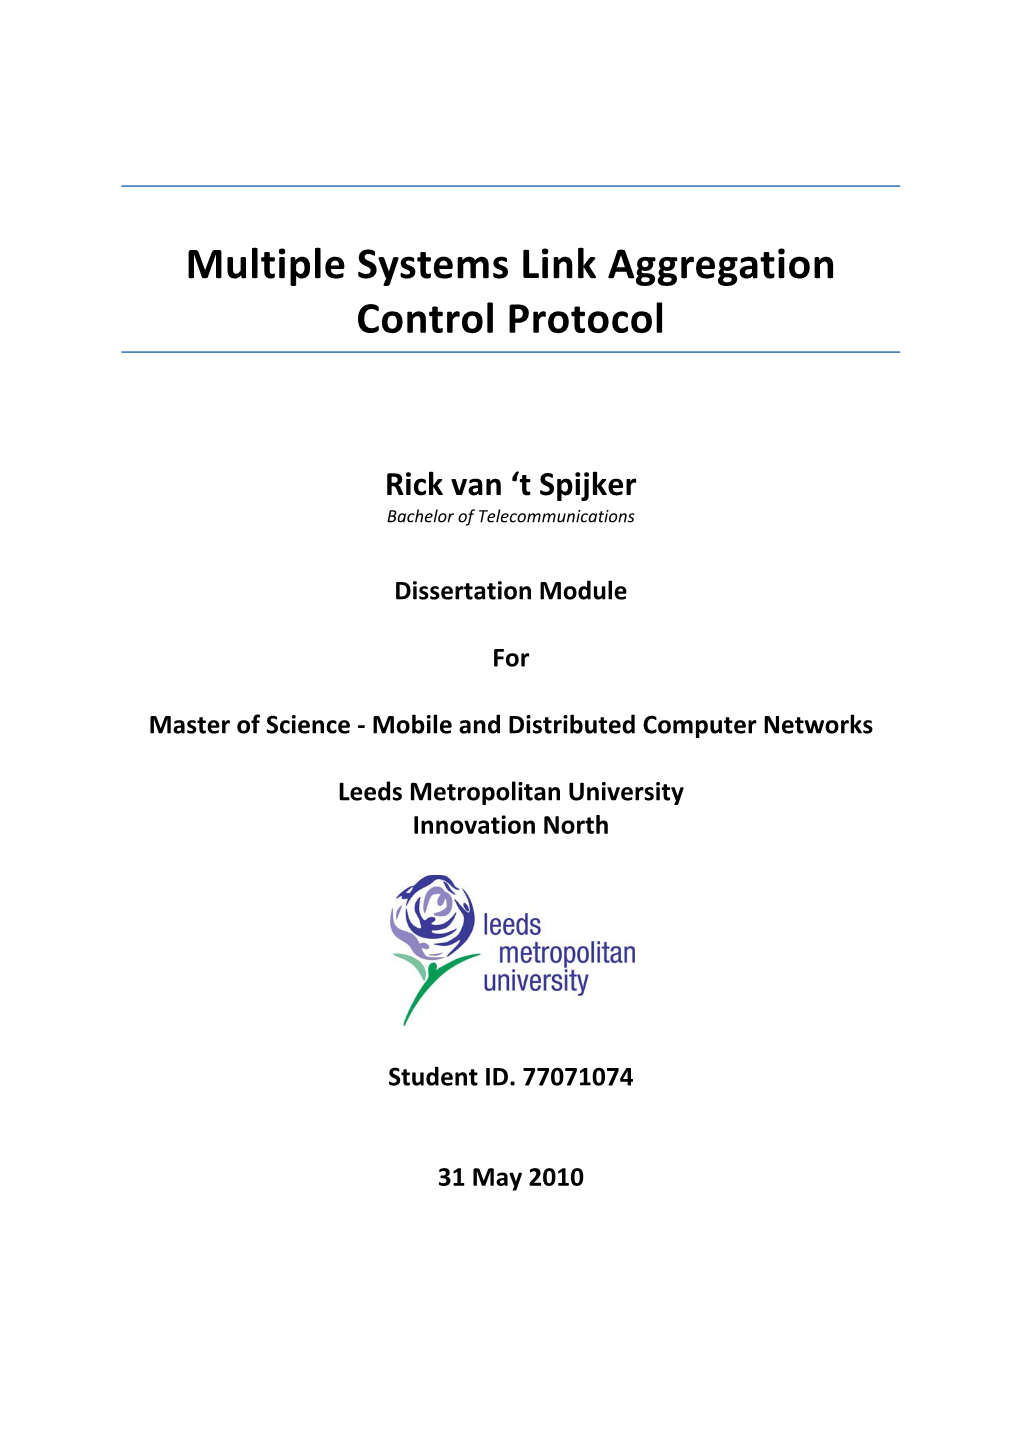 Multiple Systems Link Aggregation Control Protocol